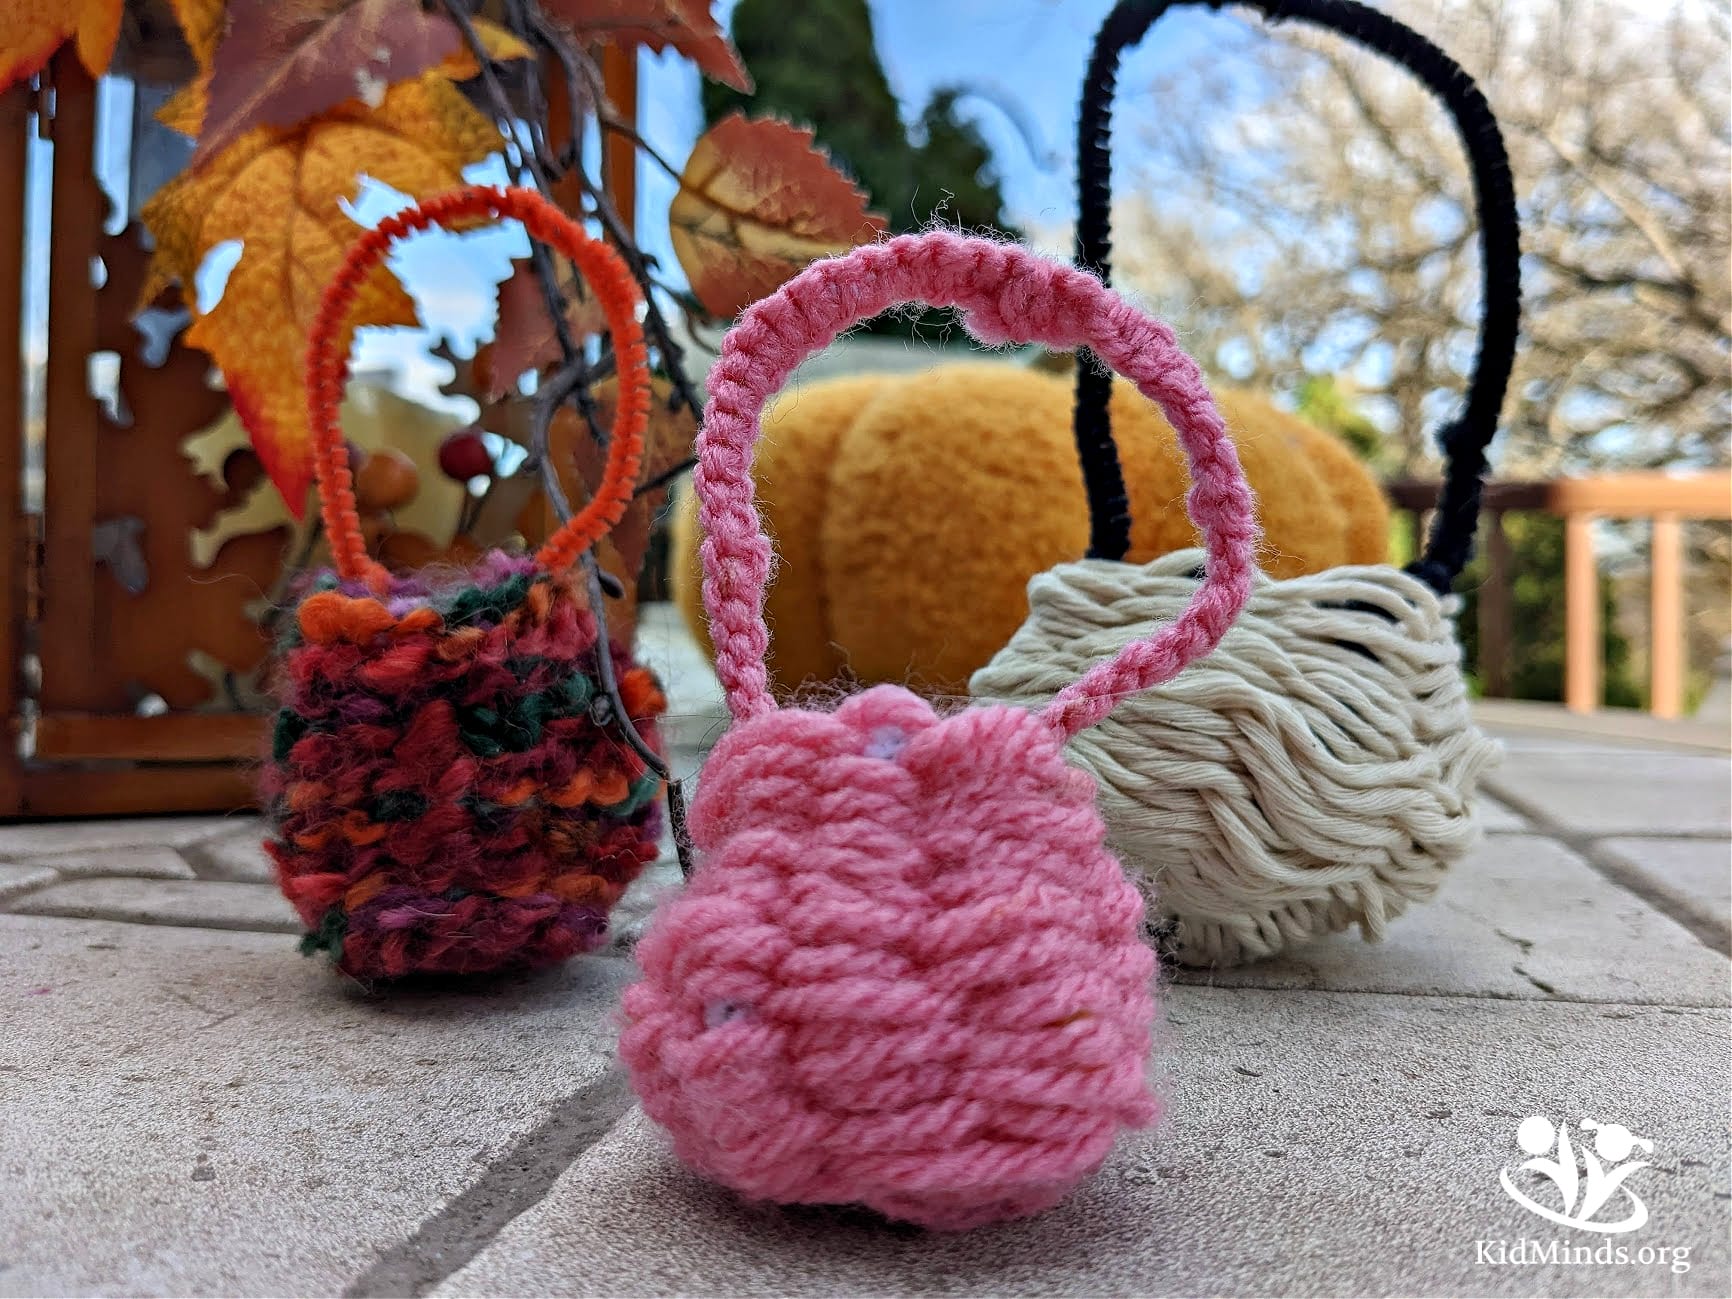 Here is an educational (and surprisingly meditative) activity to do around Thanksgiving to feel like an early settler: weave a nutting basket. #fall #kidsactivities #forkids #history #laughingkidslearn #kidminds #mentalhealth4kids